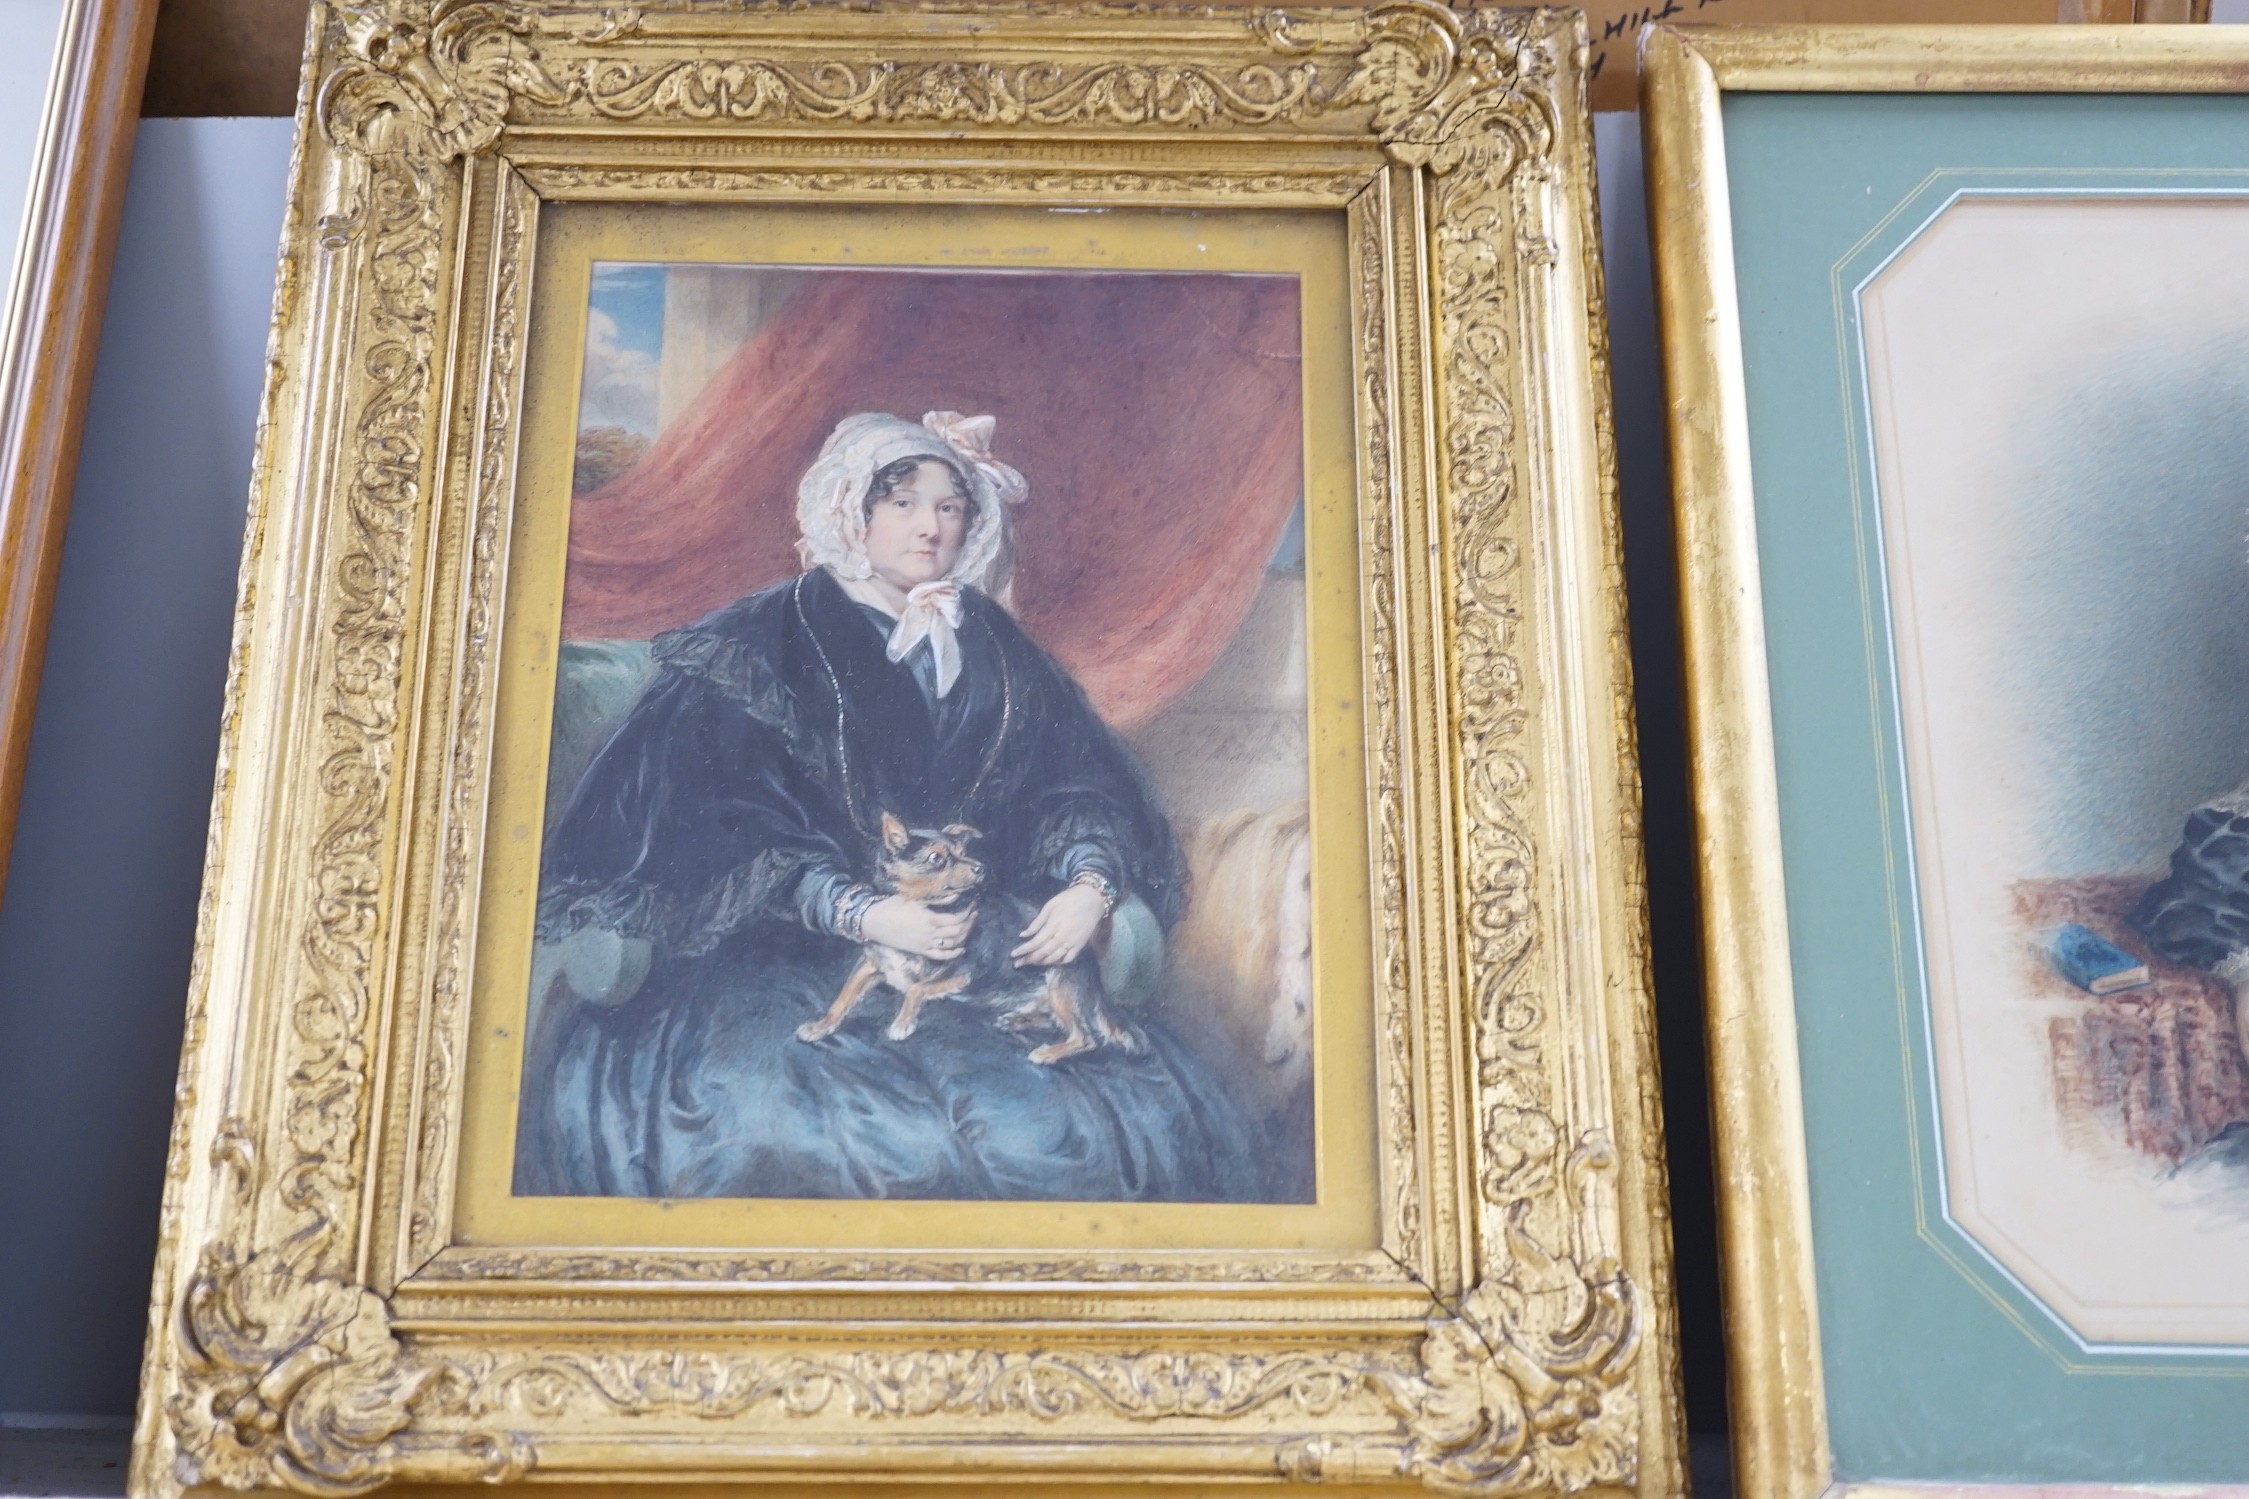 Sir William John Newton (1785-1869), watercolour, Portrait of a lady with a lap dog, 22 x 17cm, and another similar portrait of Mrs Baily, wife of Dr Bailey of Harwich, 27 x 21cm